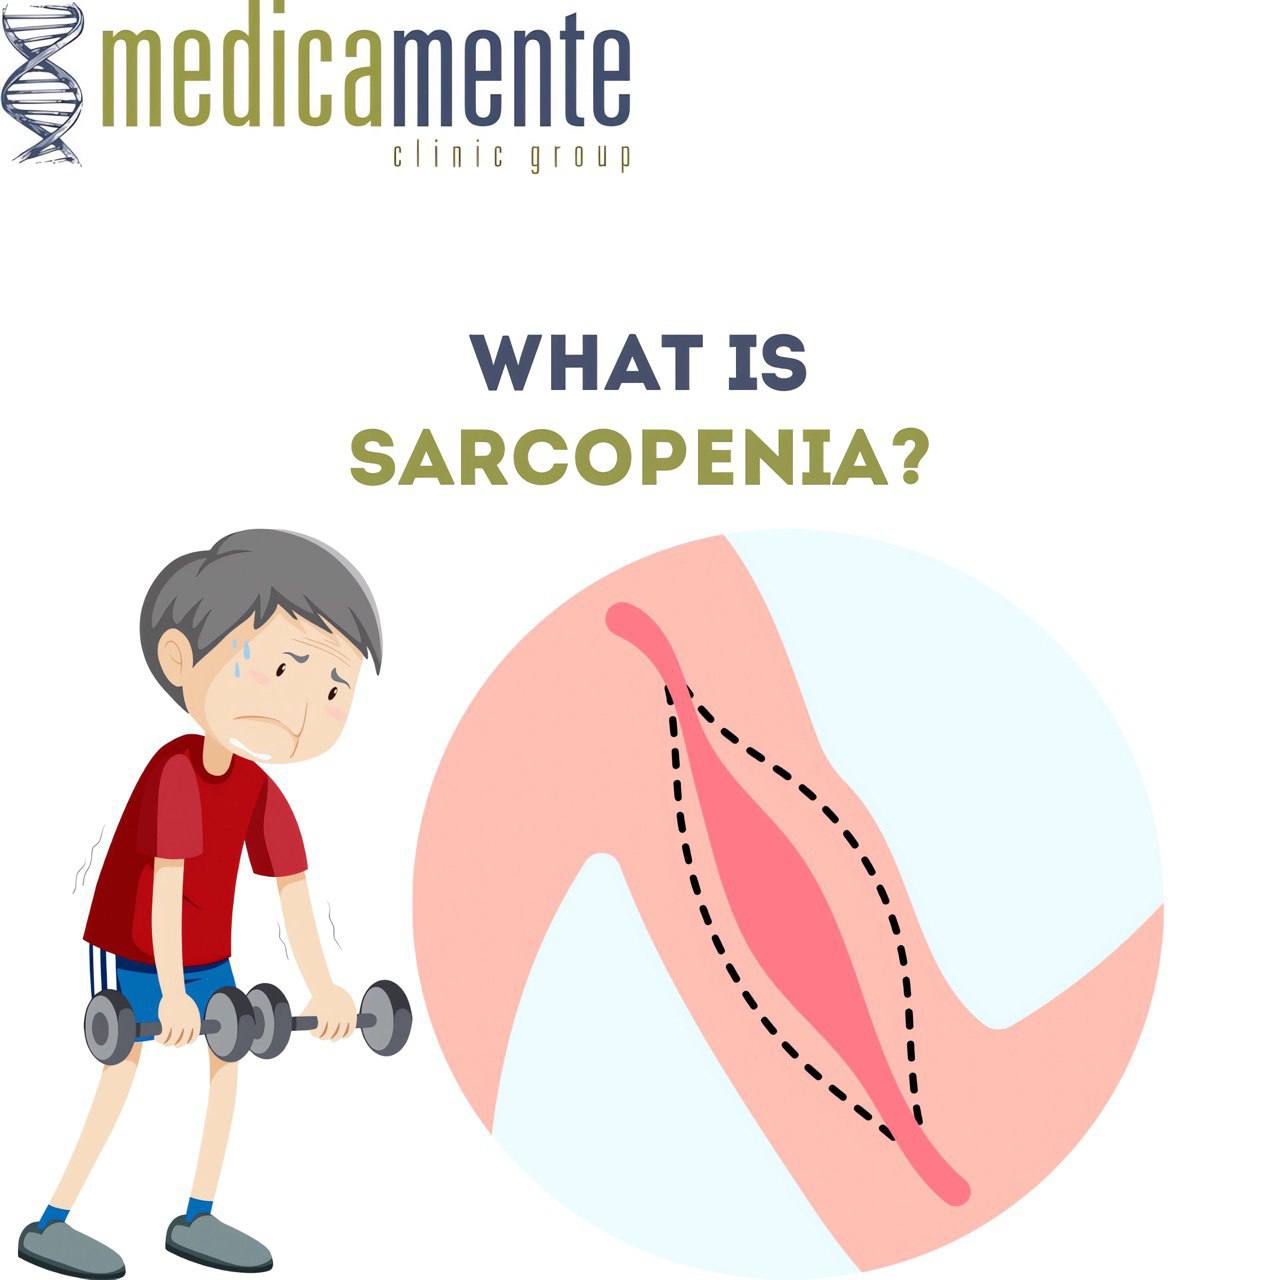 What is sarcopenia?